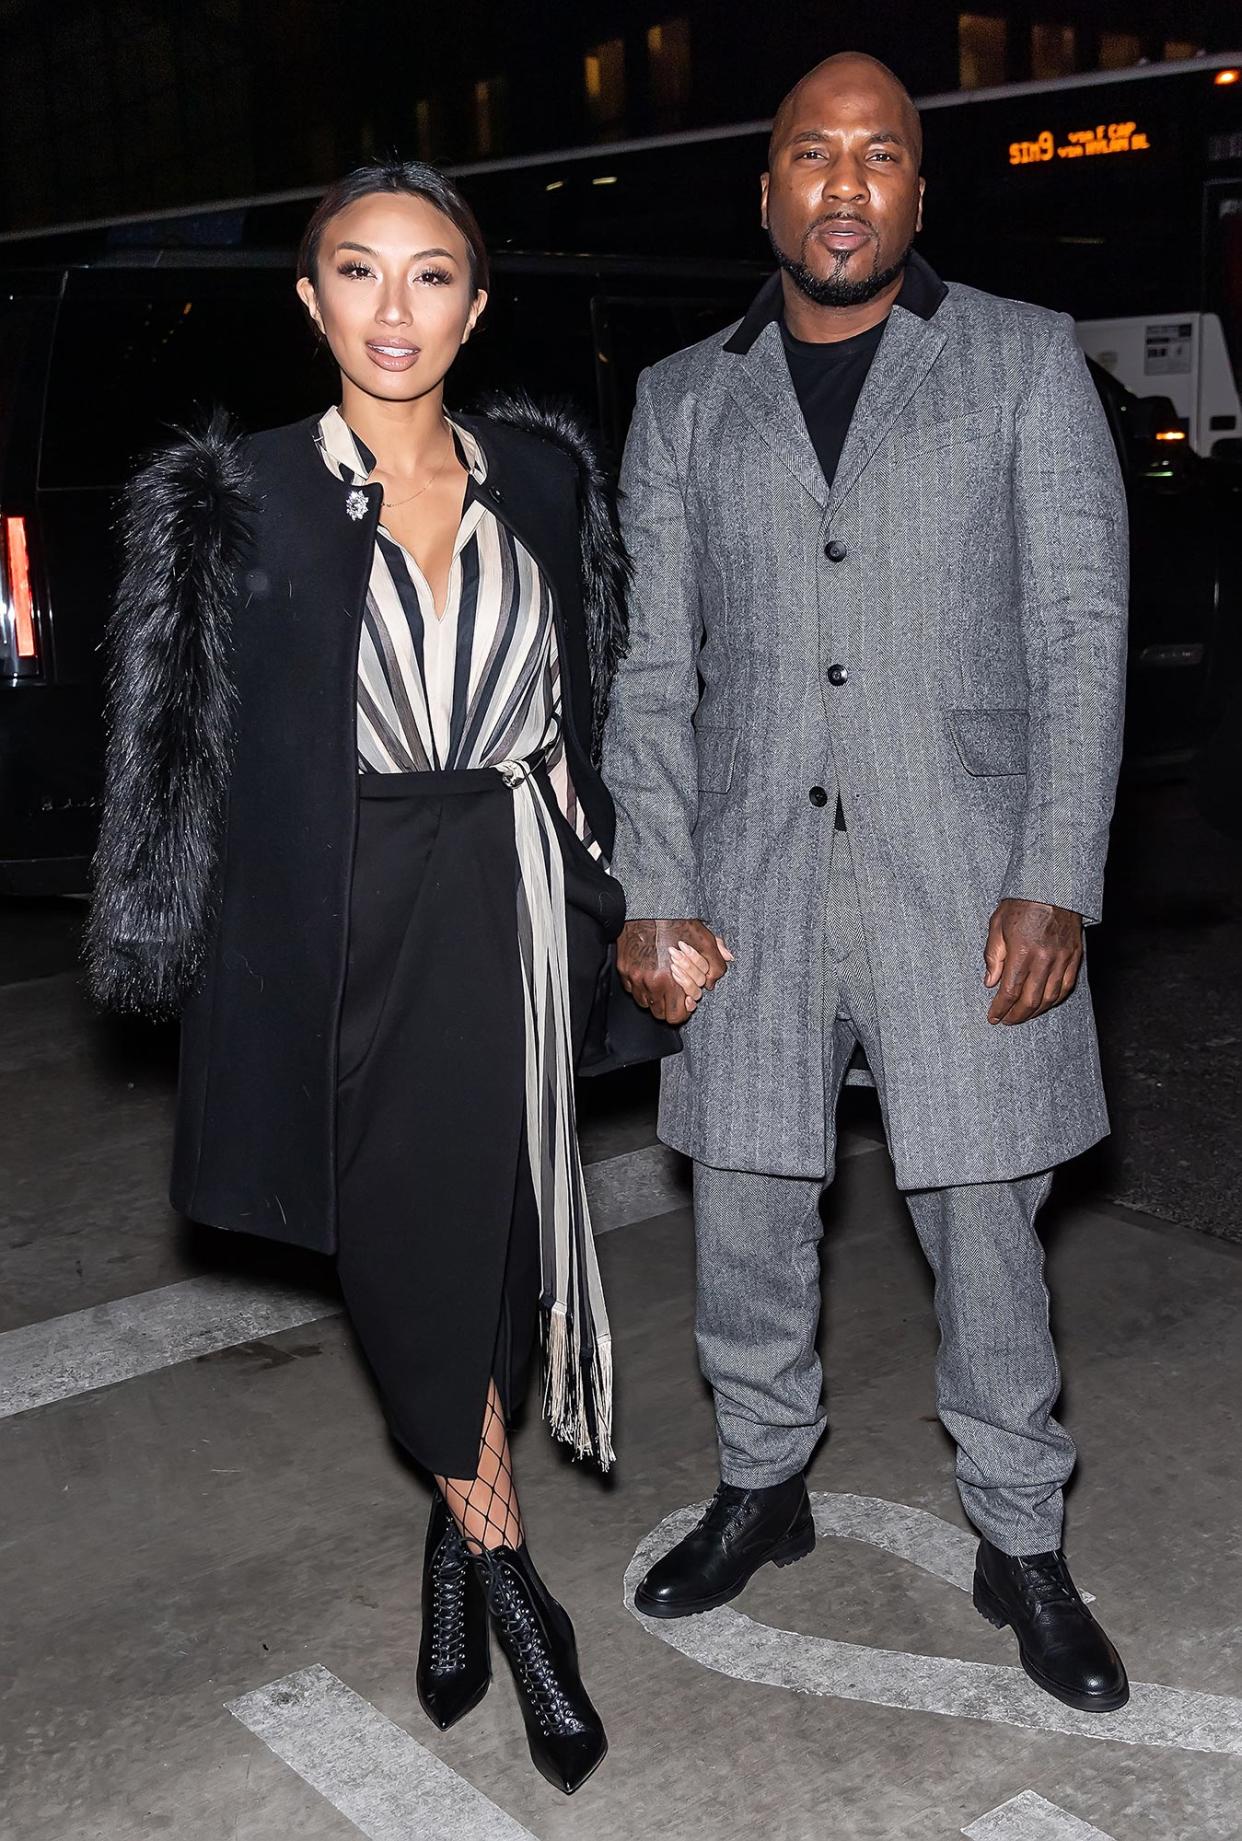 Jeannie Mai Asks Judge to Not Enforce Jeezy Prenup Claims She Did Not Review It Before Signing